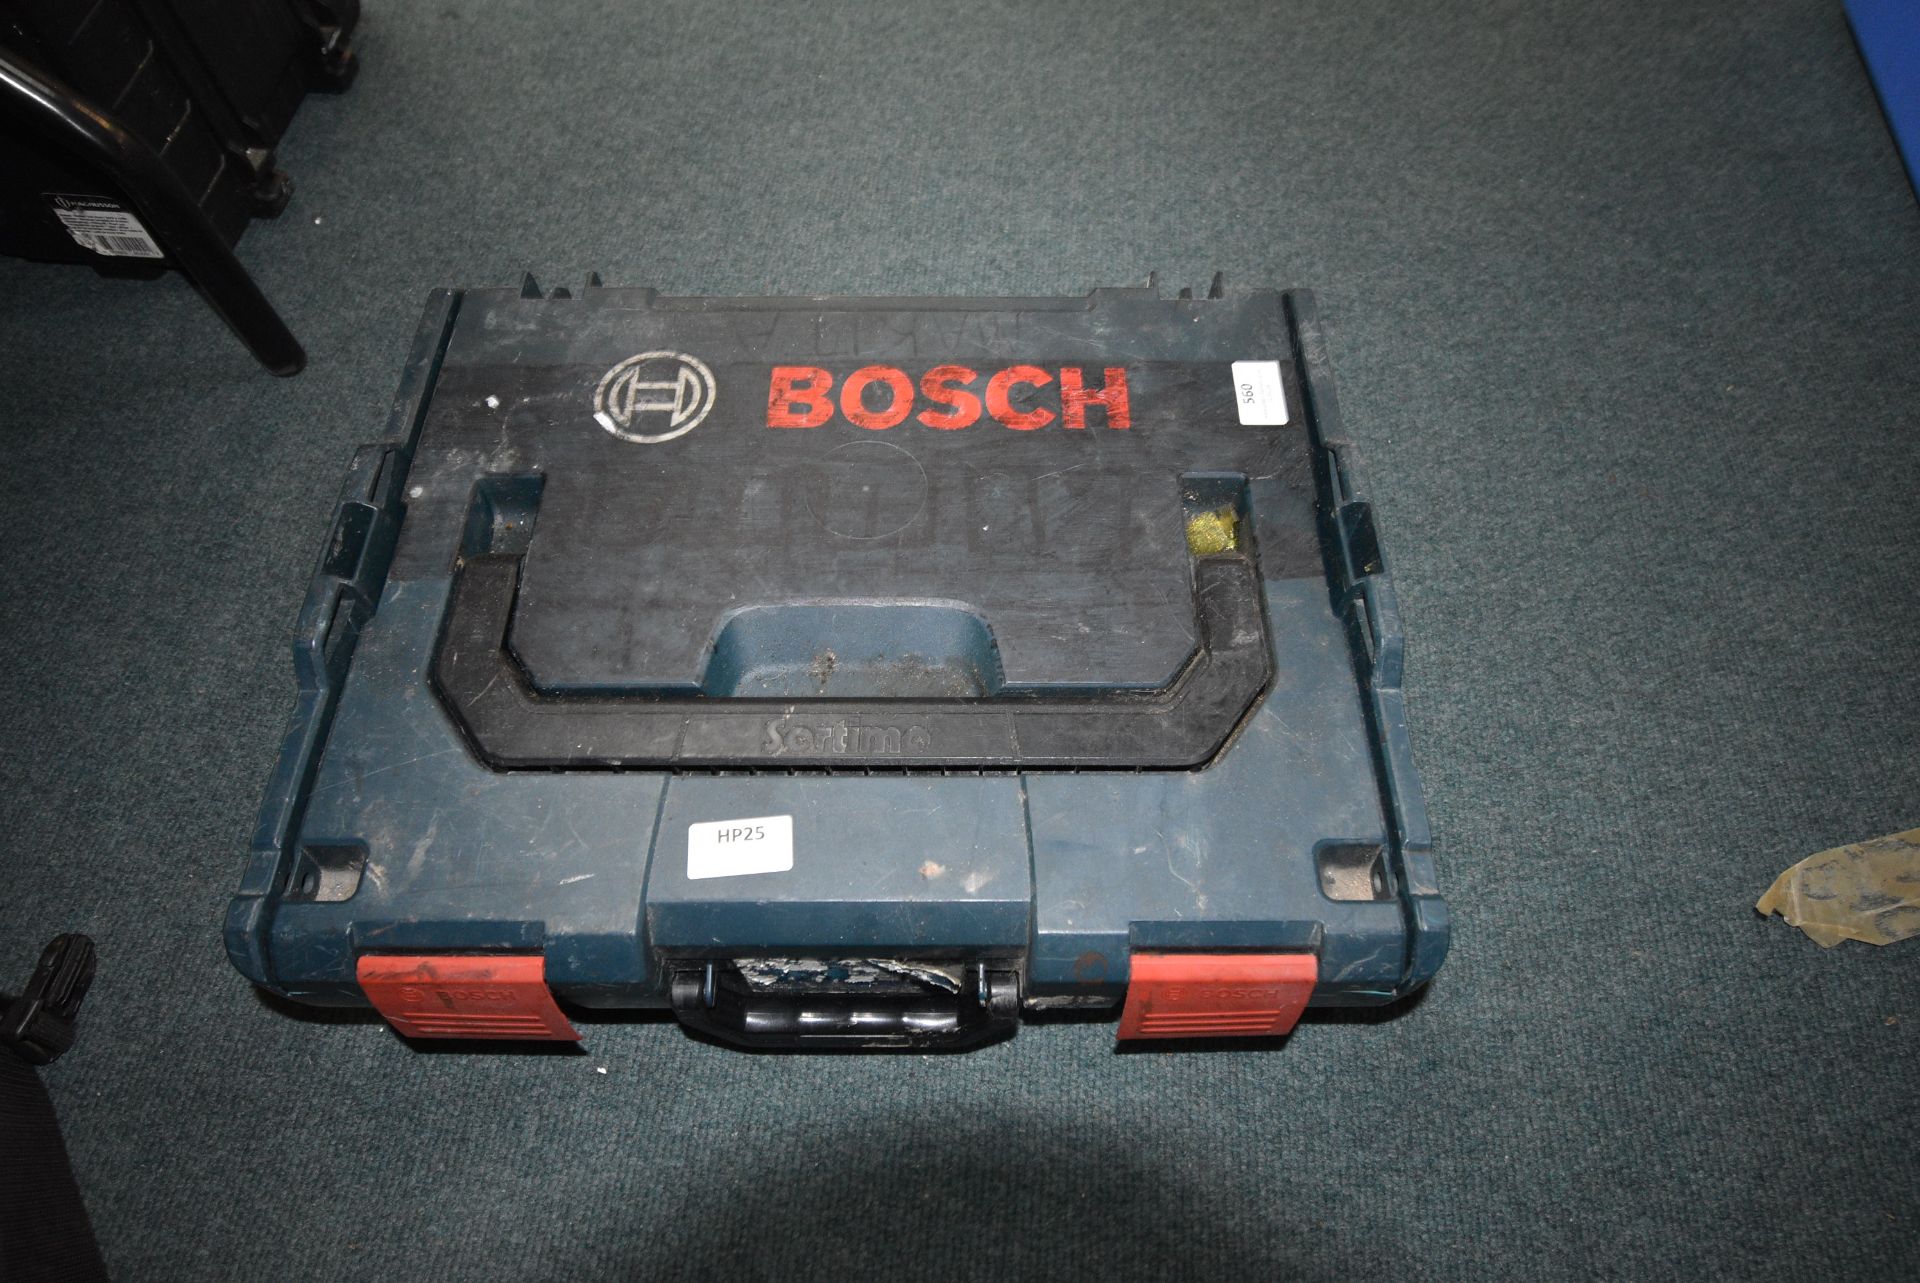 Bosch Toolbox and Contents of Screws and Fixings